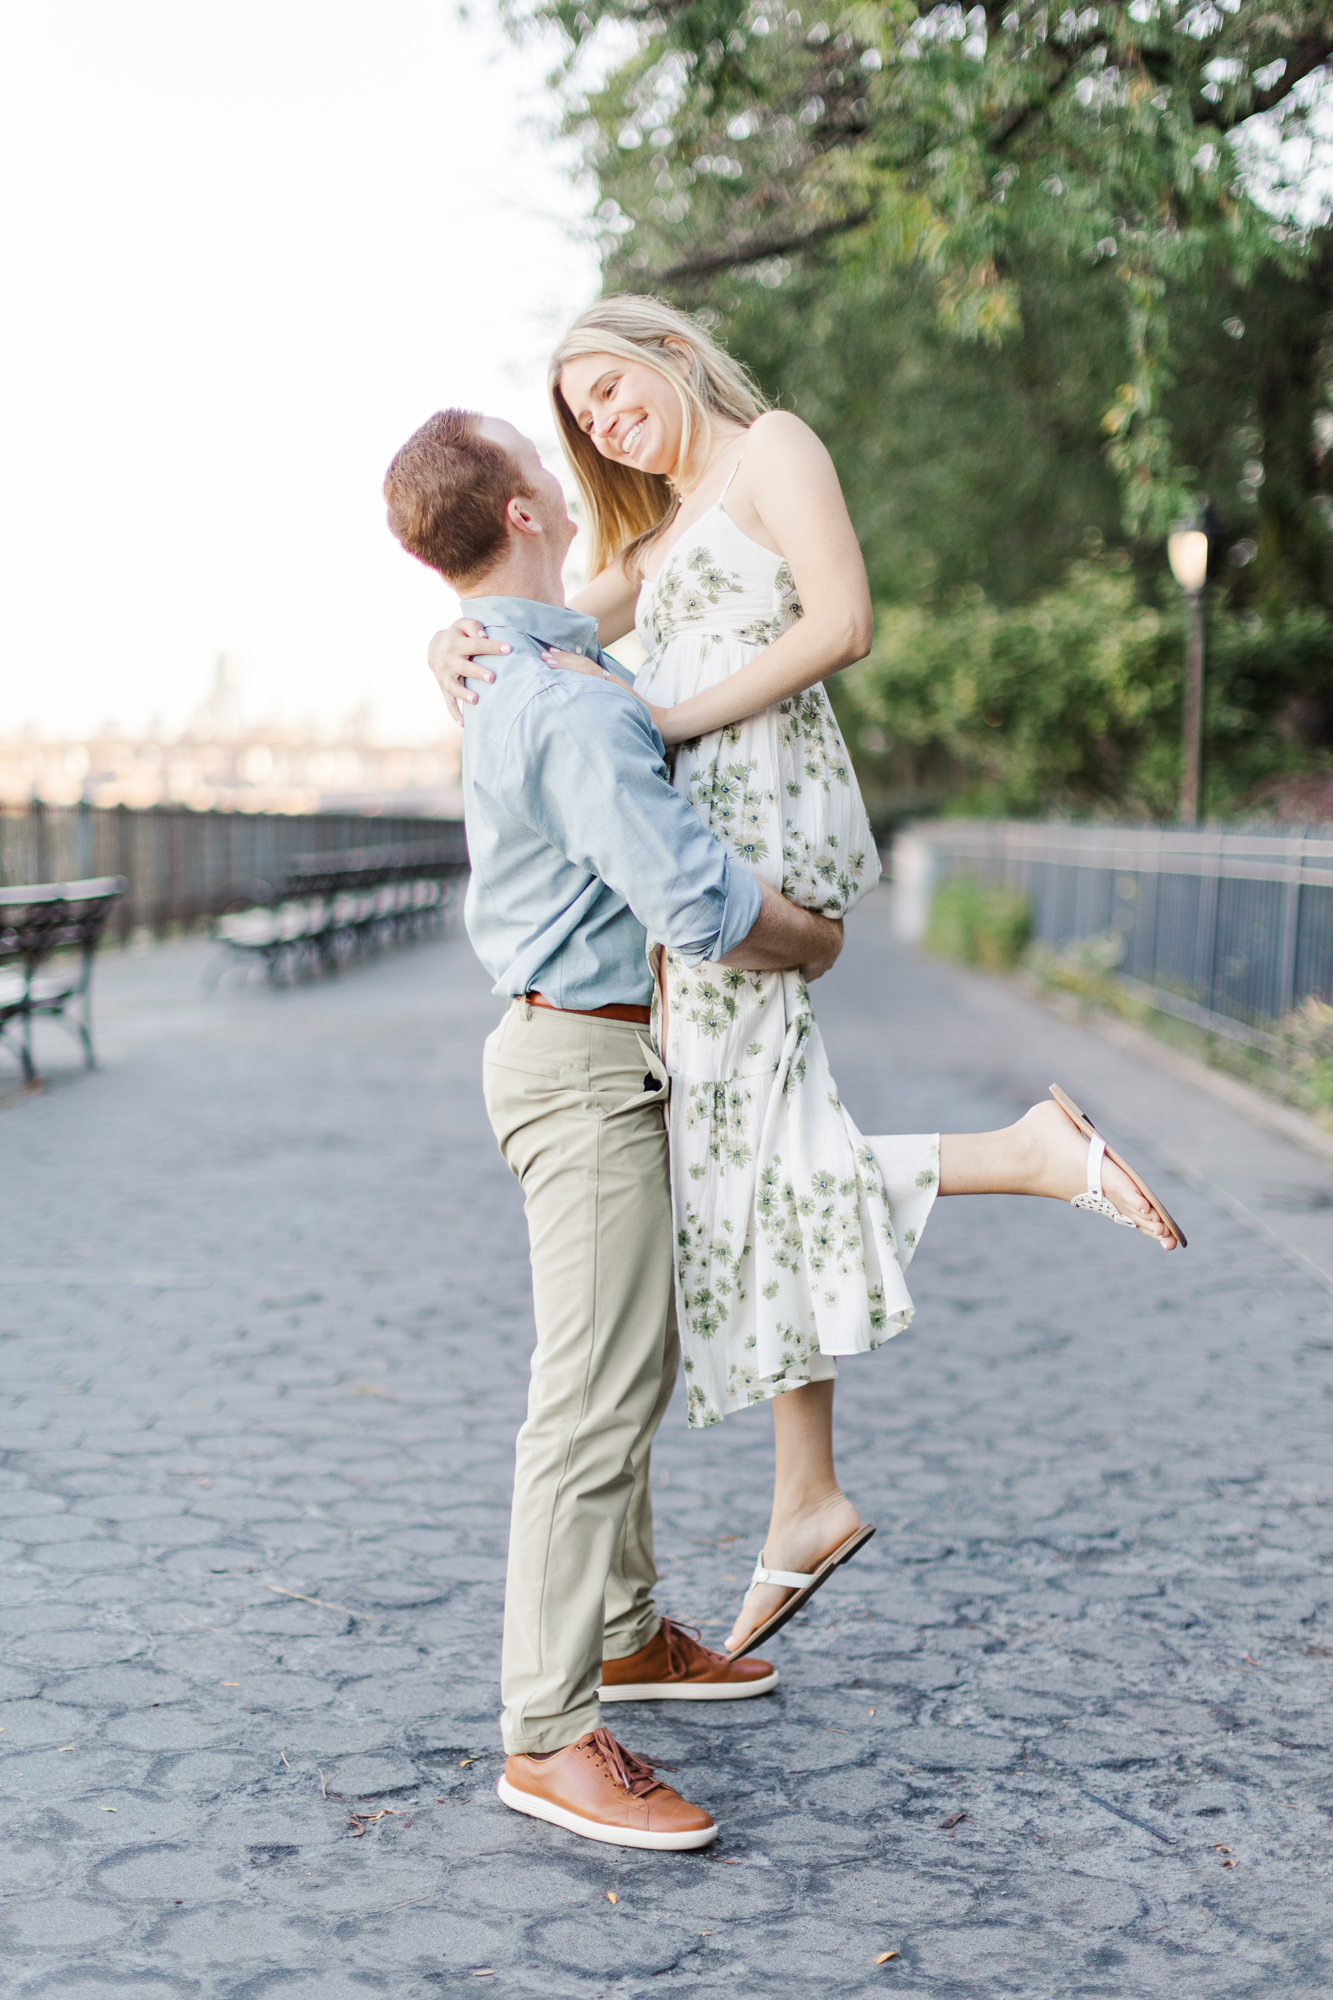 Breathtaking Engagement Photos In Brooklyn Heights